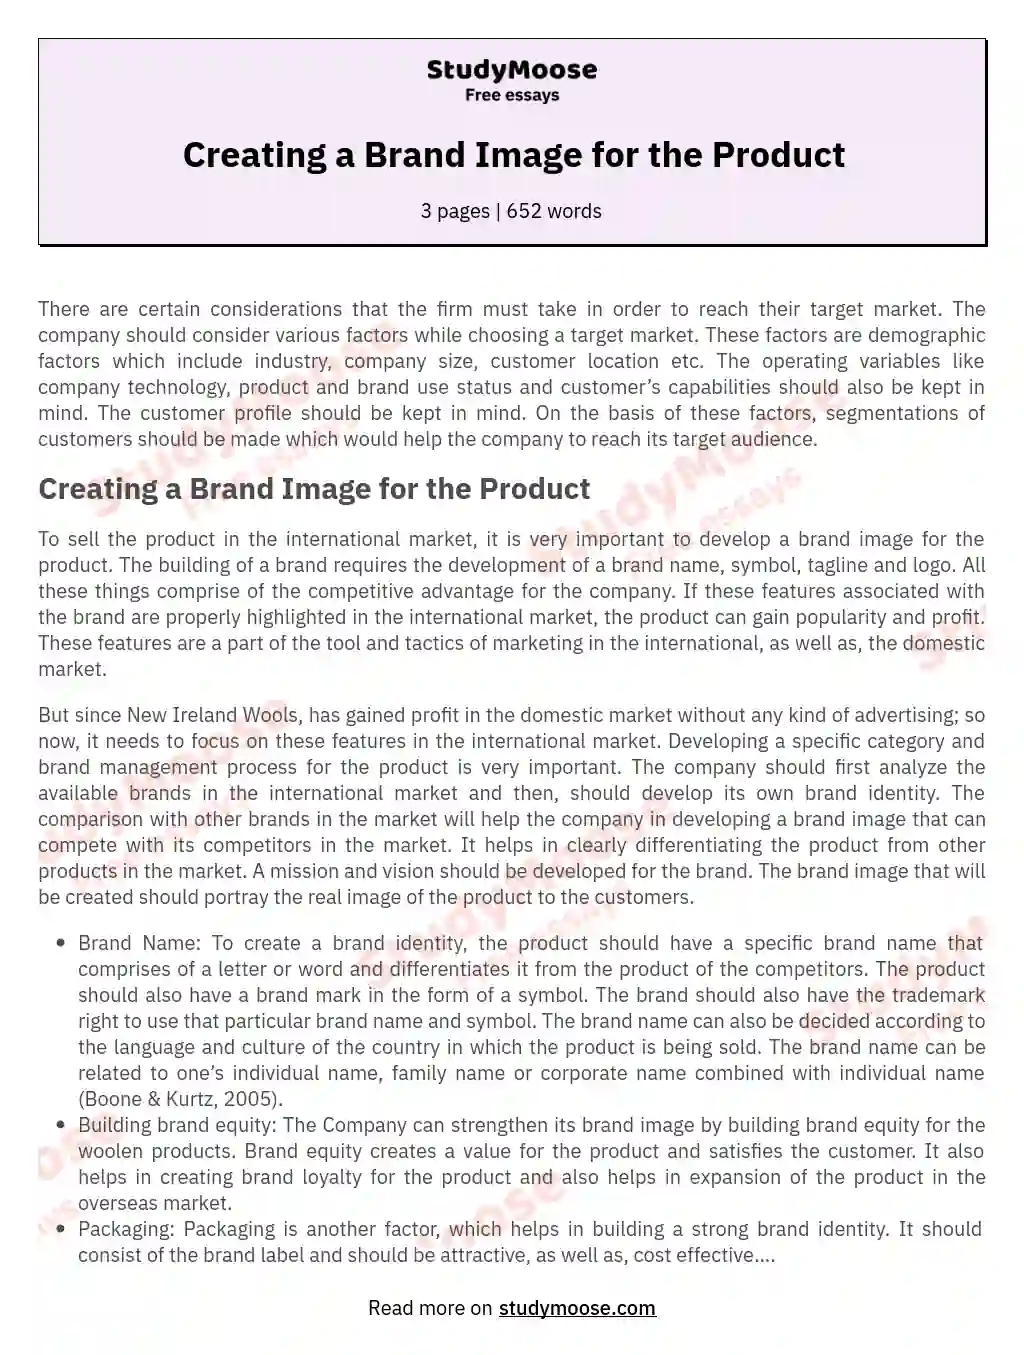 Creating a Brand Image for the Product essay